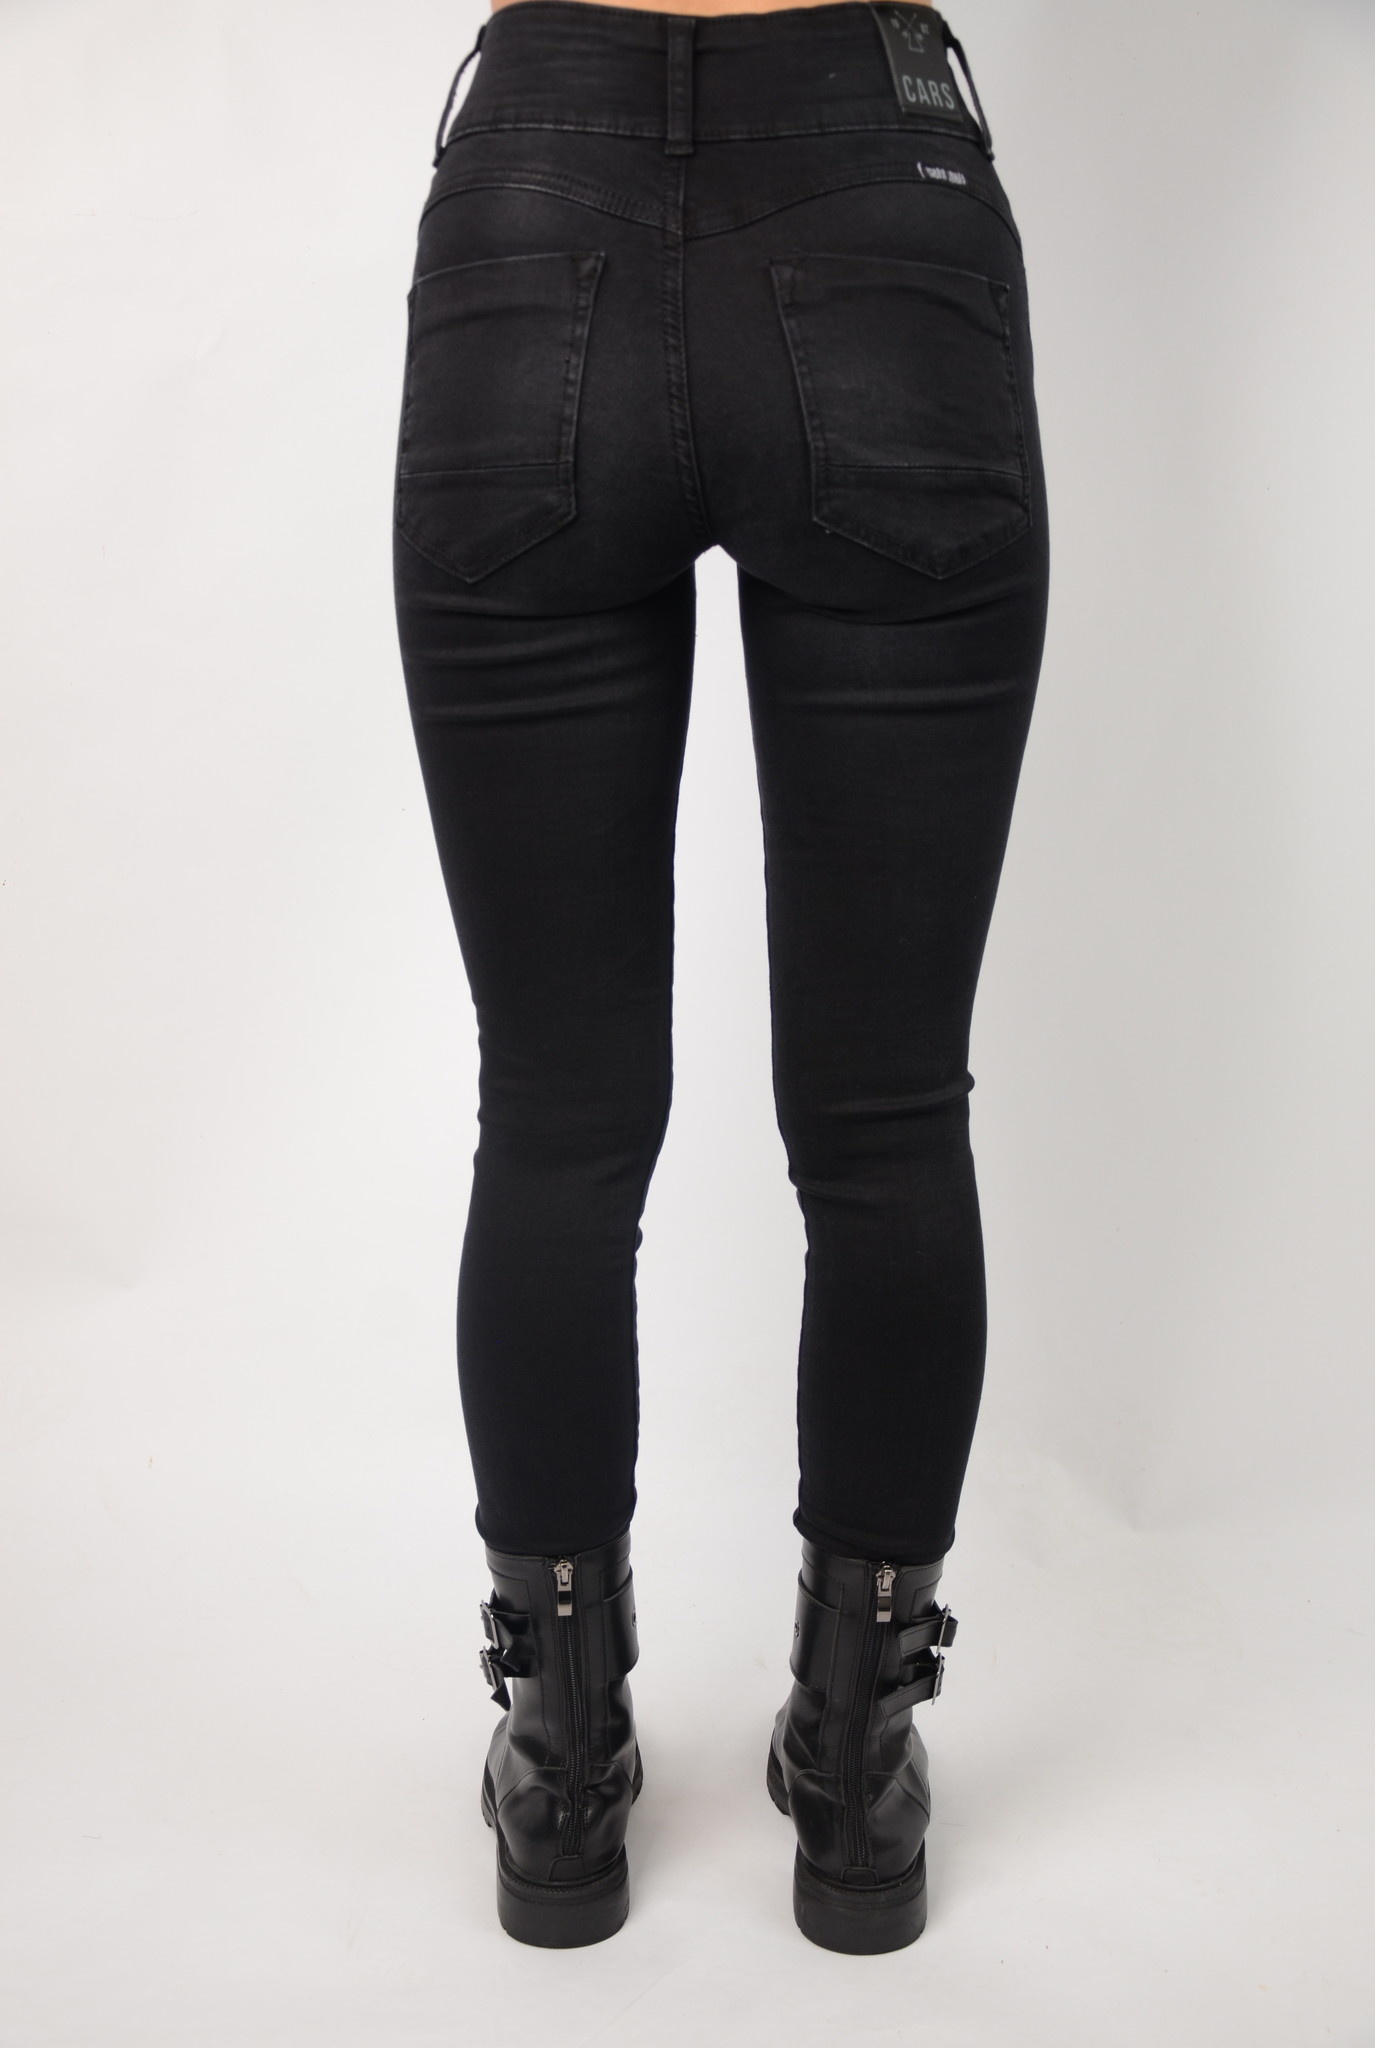 Cars Jeans Amazing Ladies Used Bestel Nu Online | Jeansbrothers